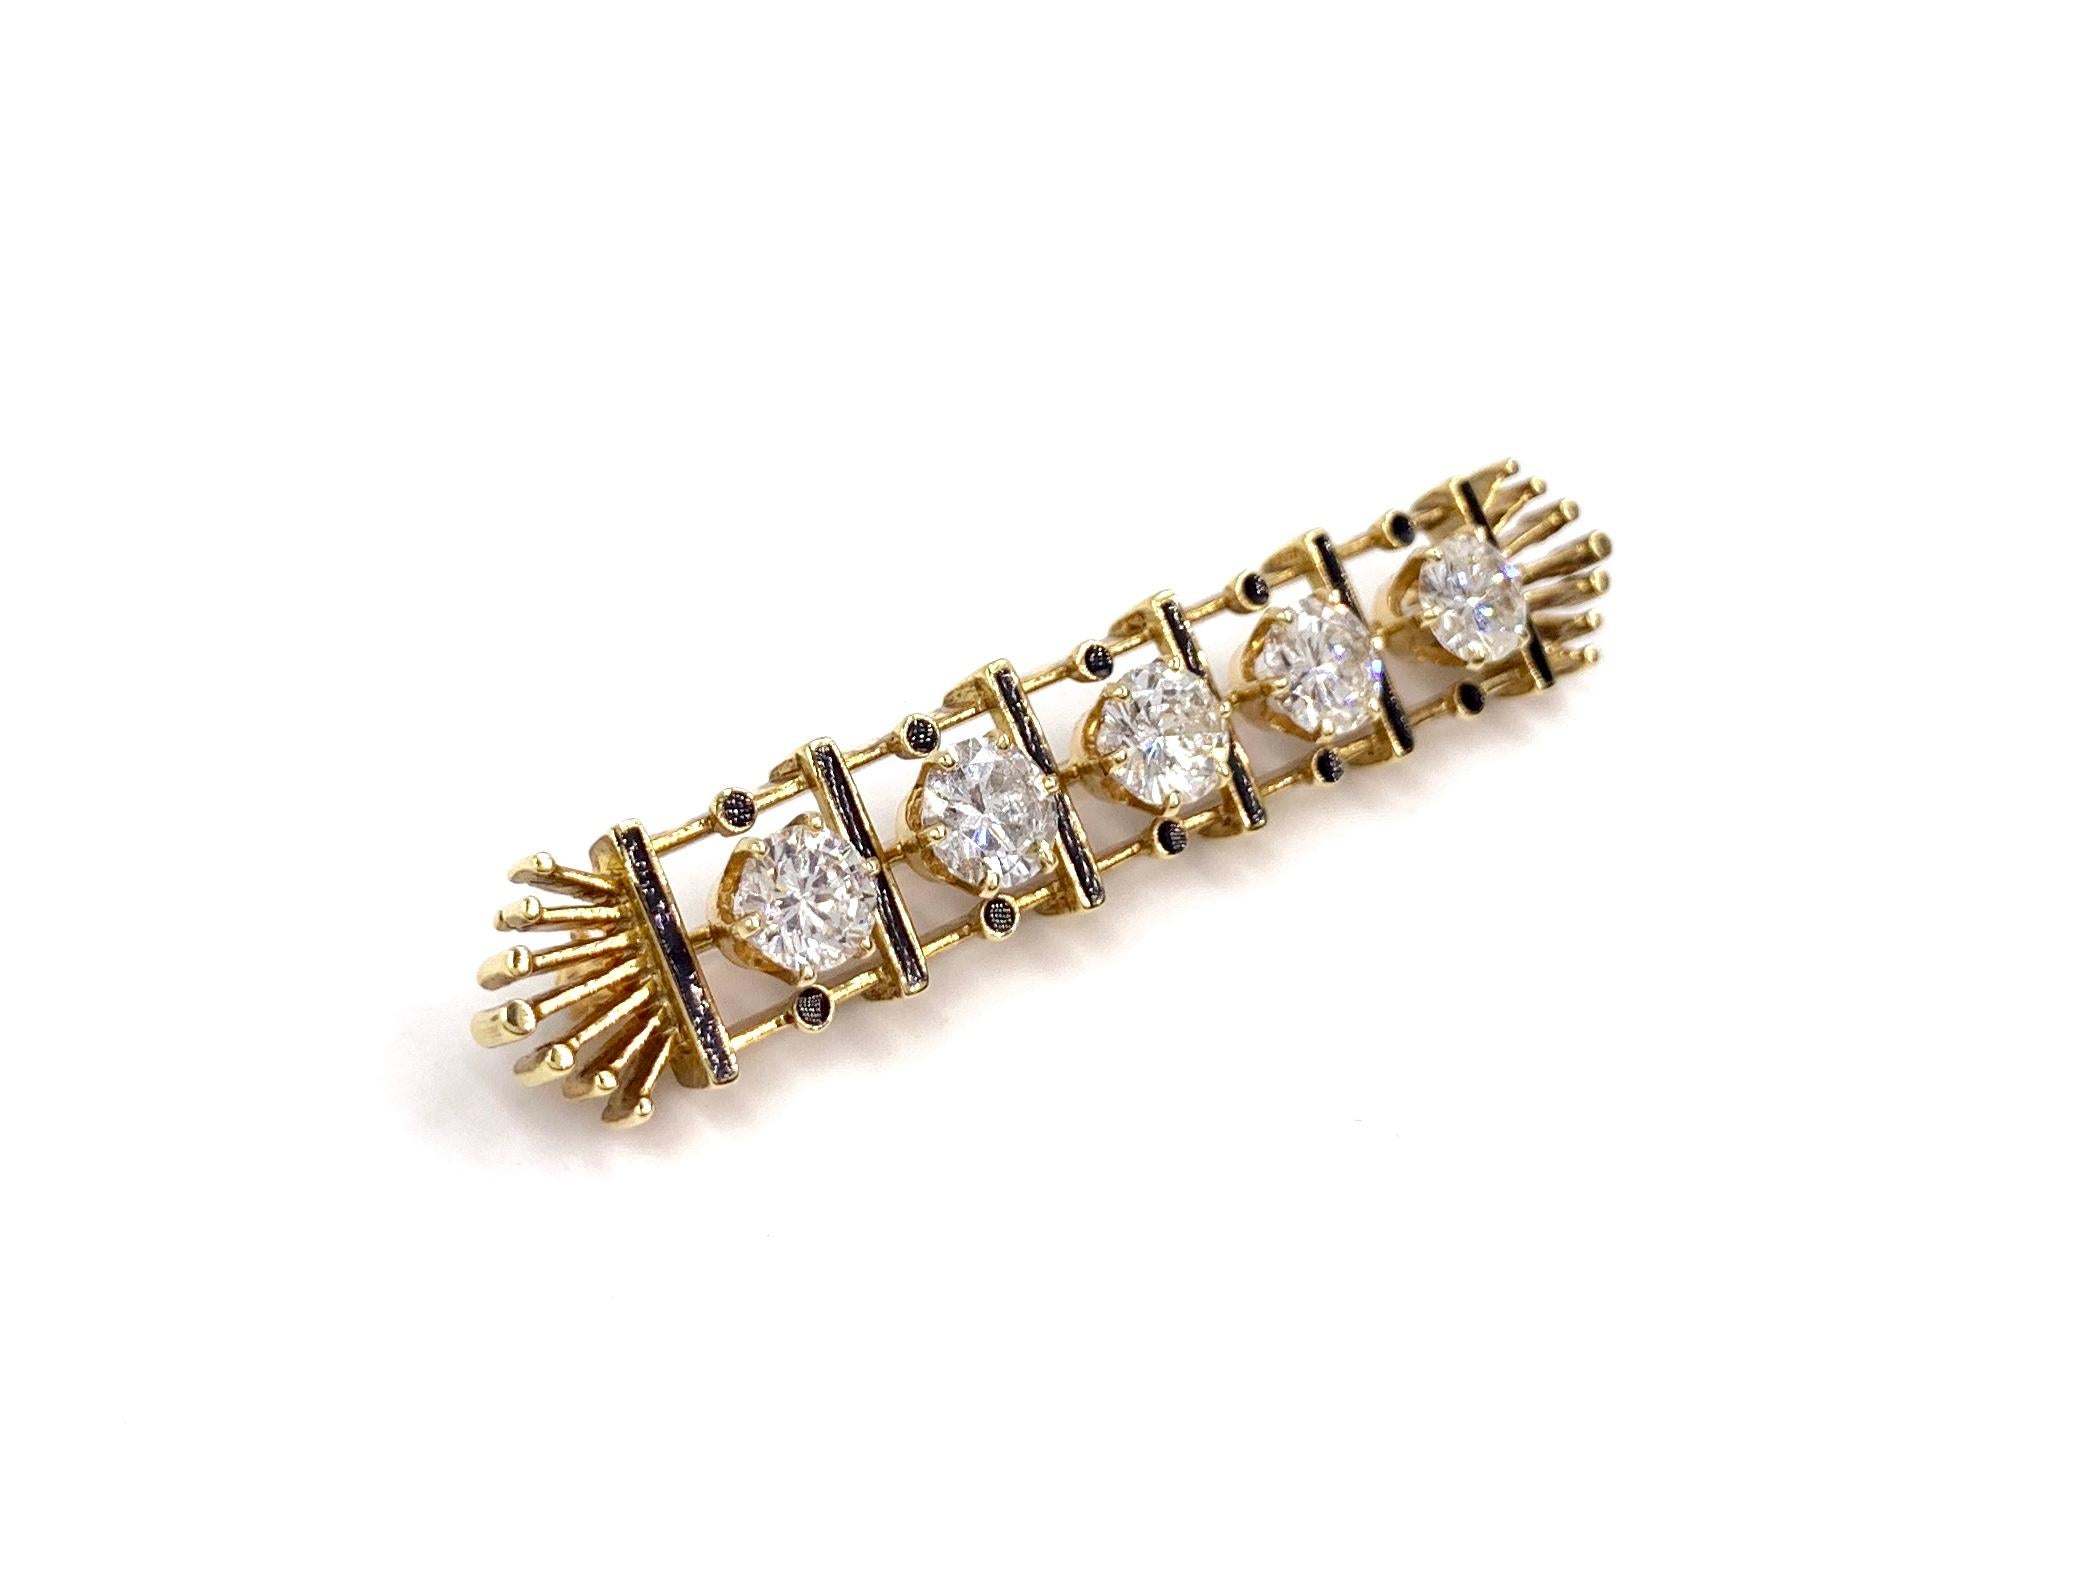 A timeless and well made 14 karat yellow gold and black enamel bar brooch featuring five round brilliant diamonds at 2.89 carats total weight. Diamond quality is approximately G color, SI1-SI2 clarity with a generous amount of brilliance and